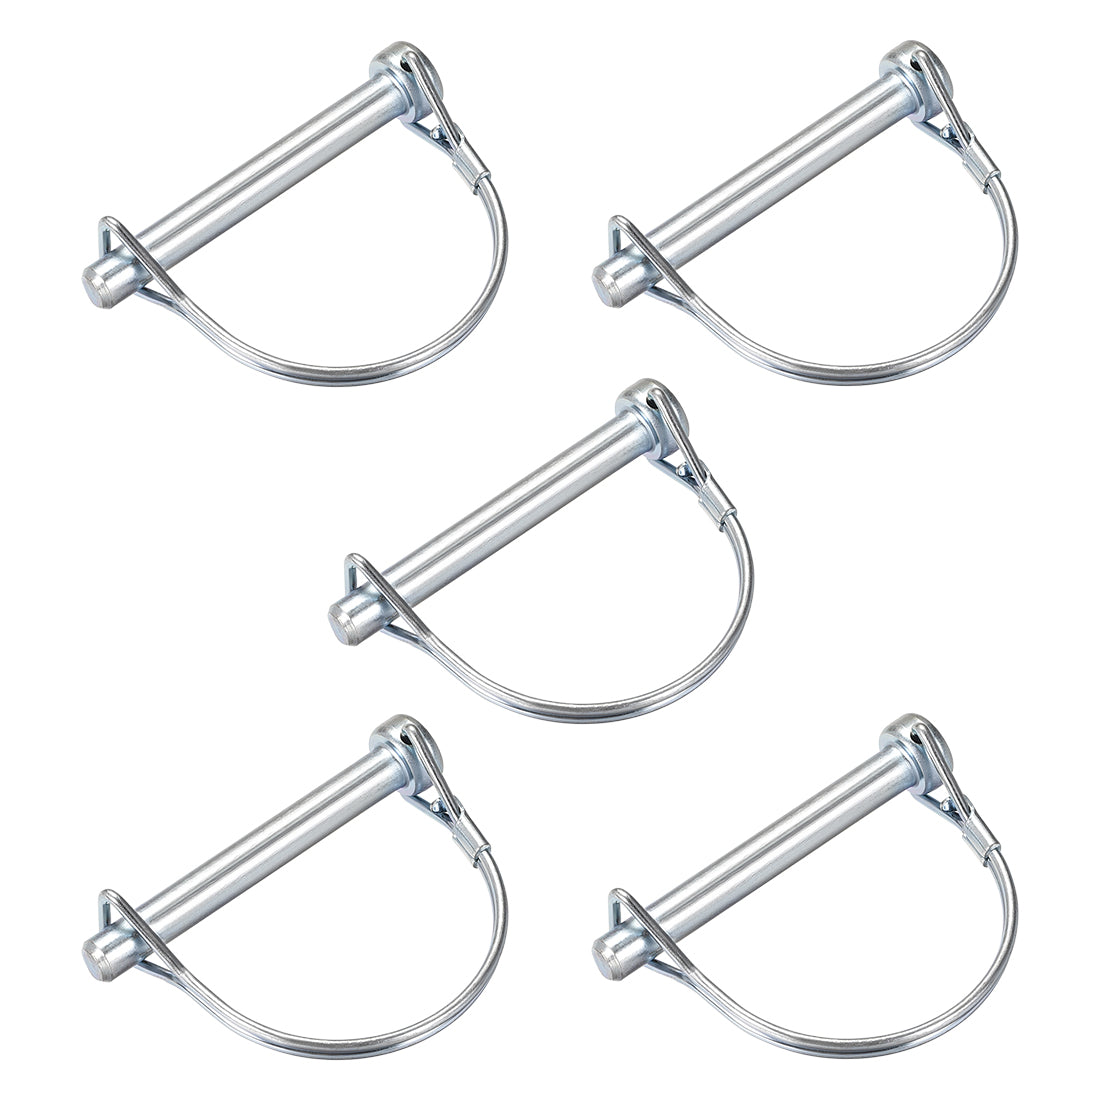 uxcell Uxcell Shaft Locking Pin 8mmx65mm Coupler Pin for Farm Trailers Lawn Arch 5Pcs